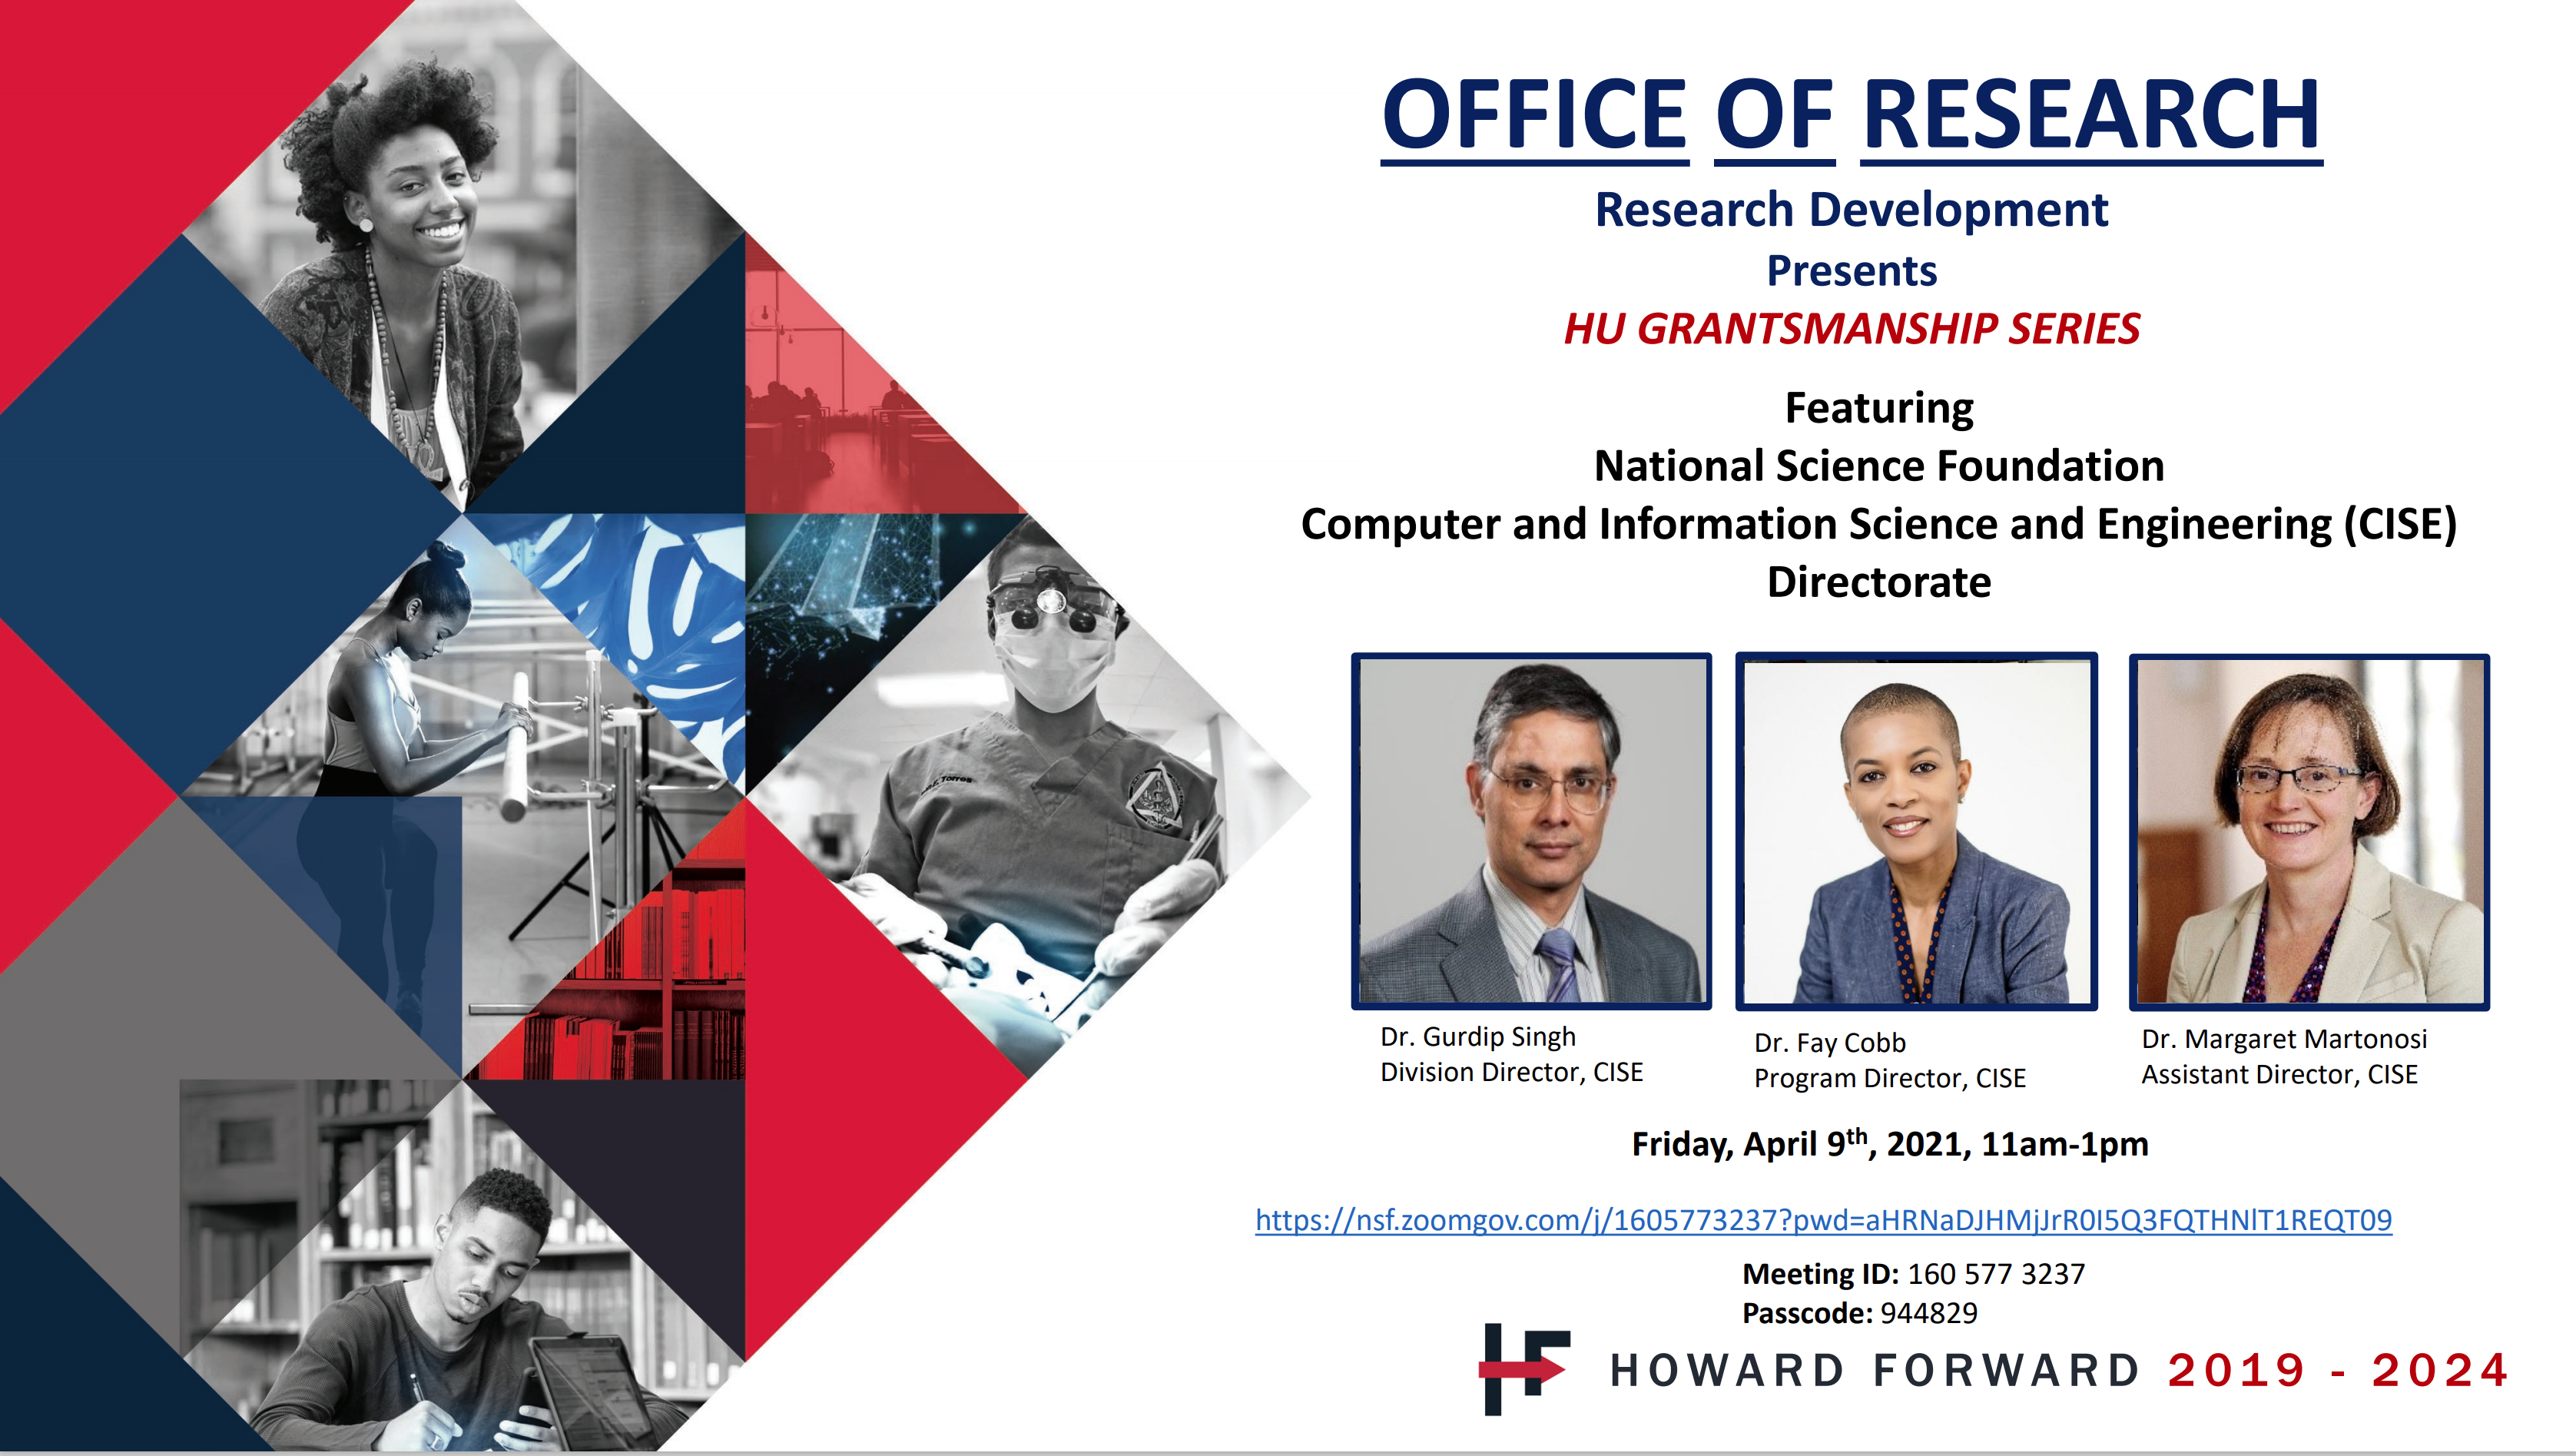 Office of Research - Research Development - Presents - HU Grantsmanship Series - Featuring - National Science Foundation - Computer and Information Science and Engineering (CISE) - Directorate